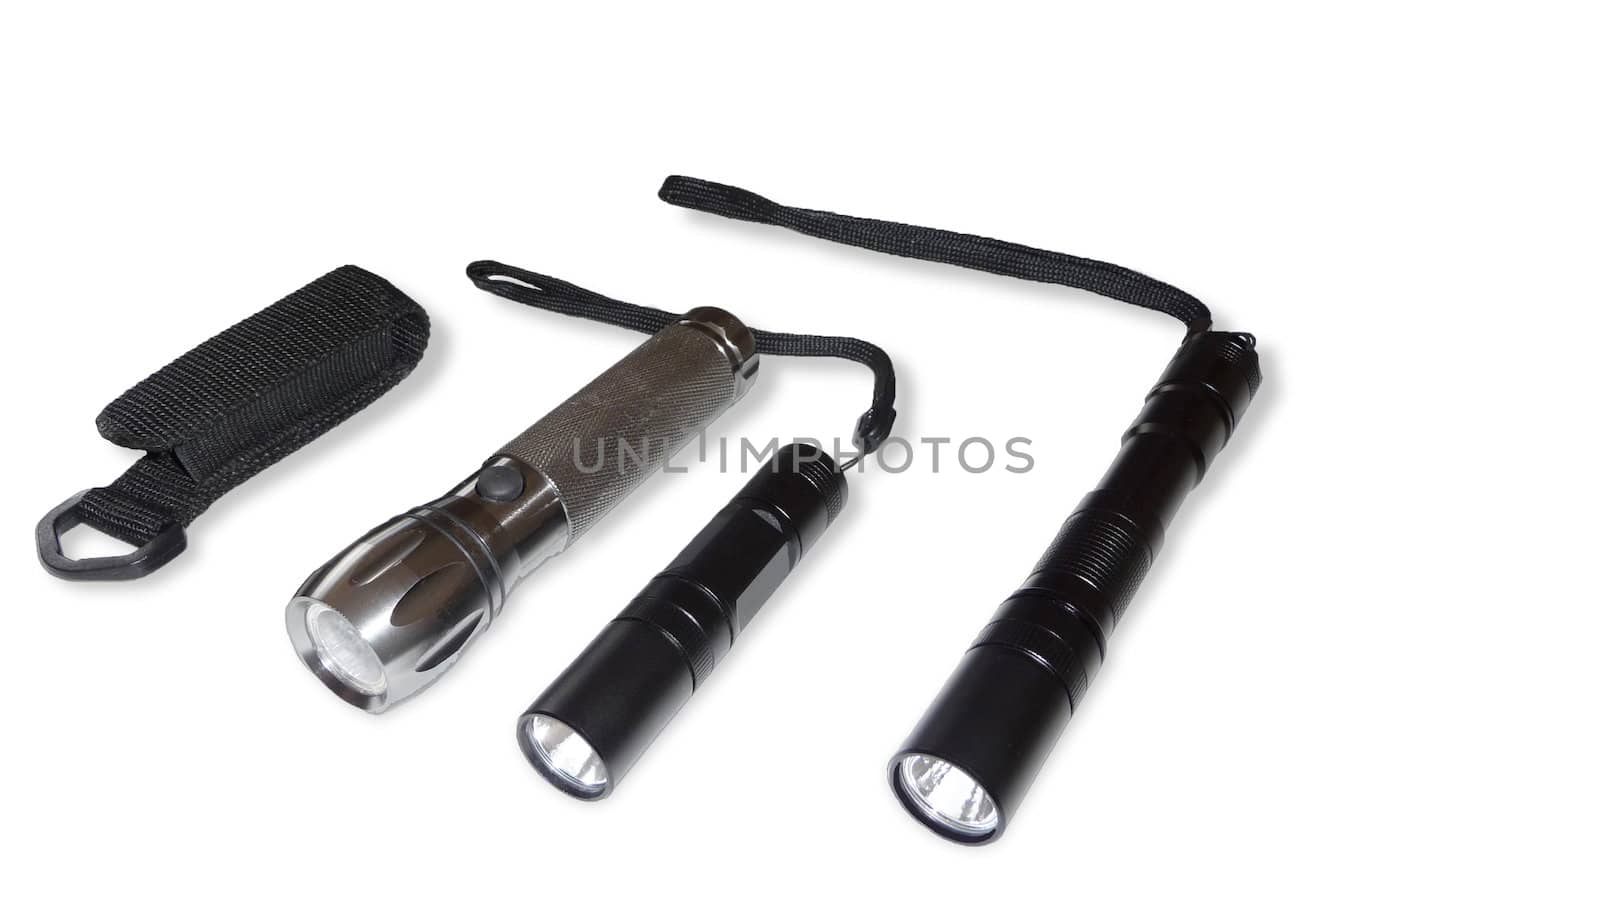 Collection of flashlight